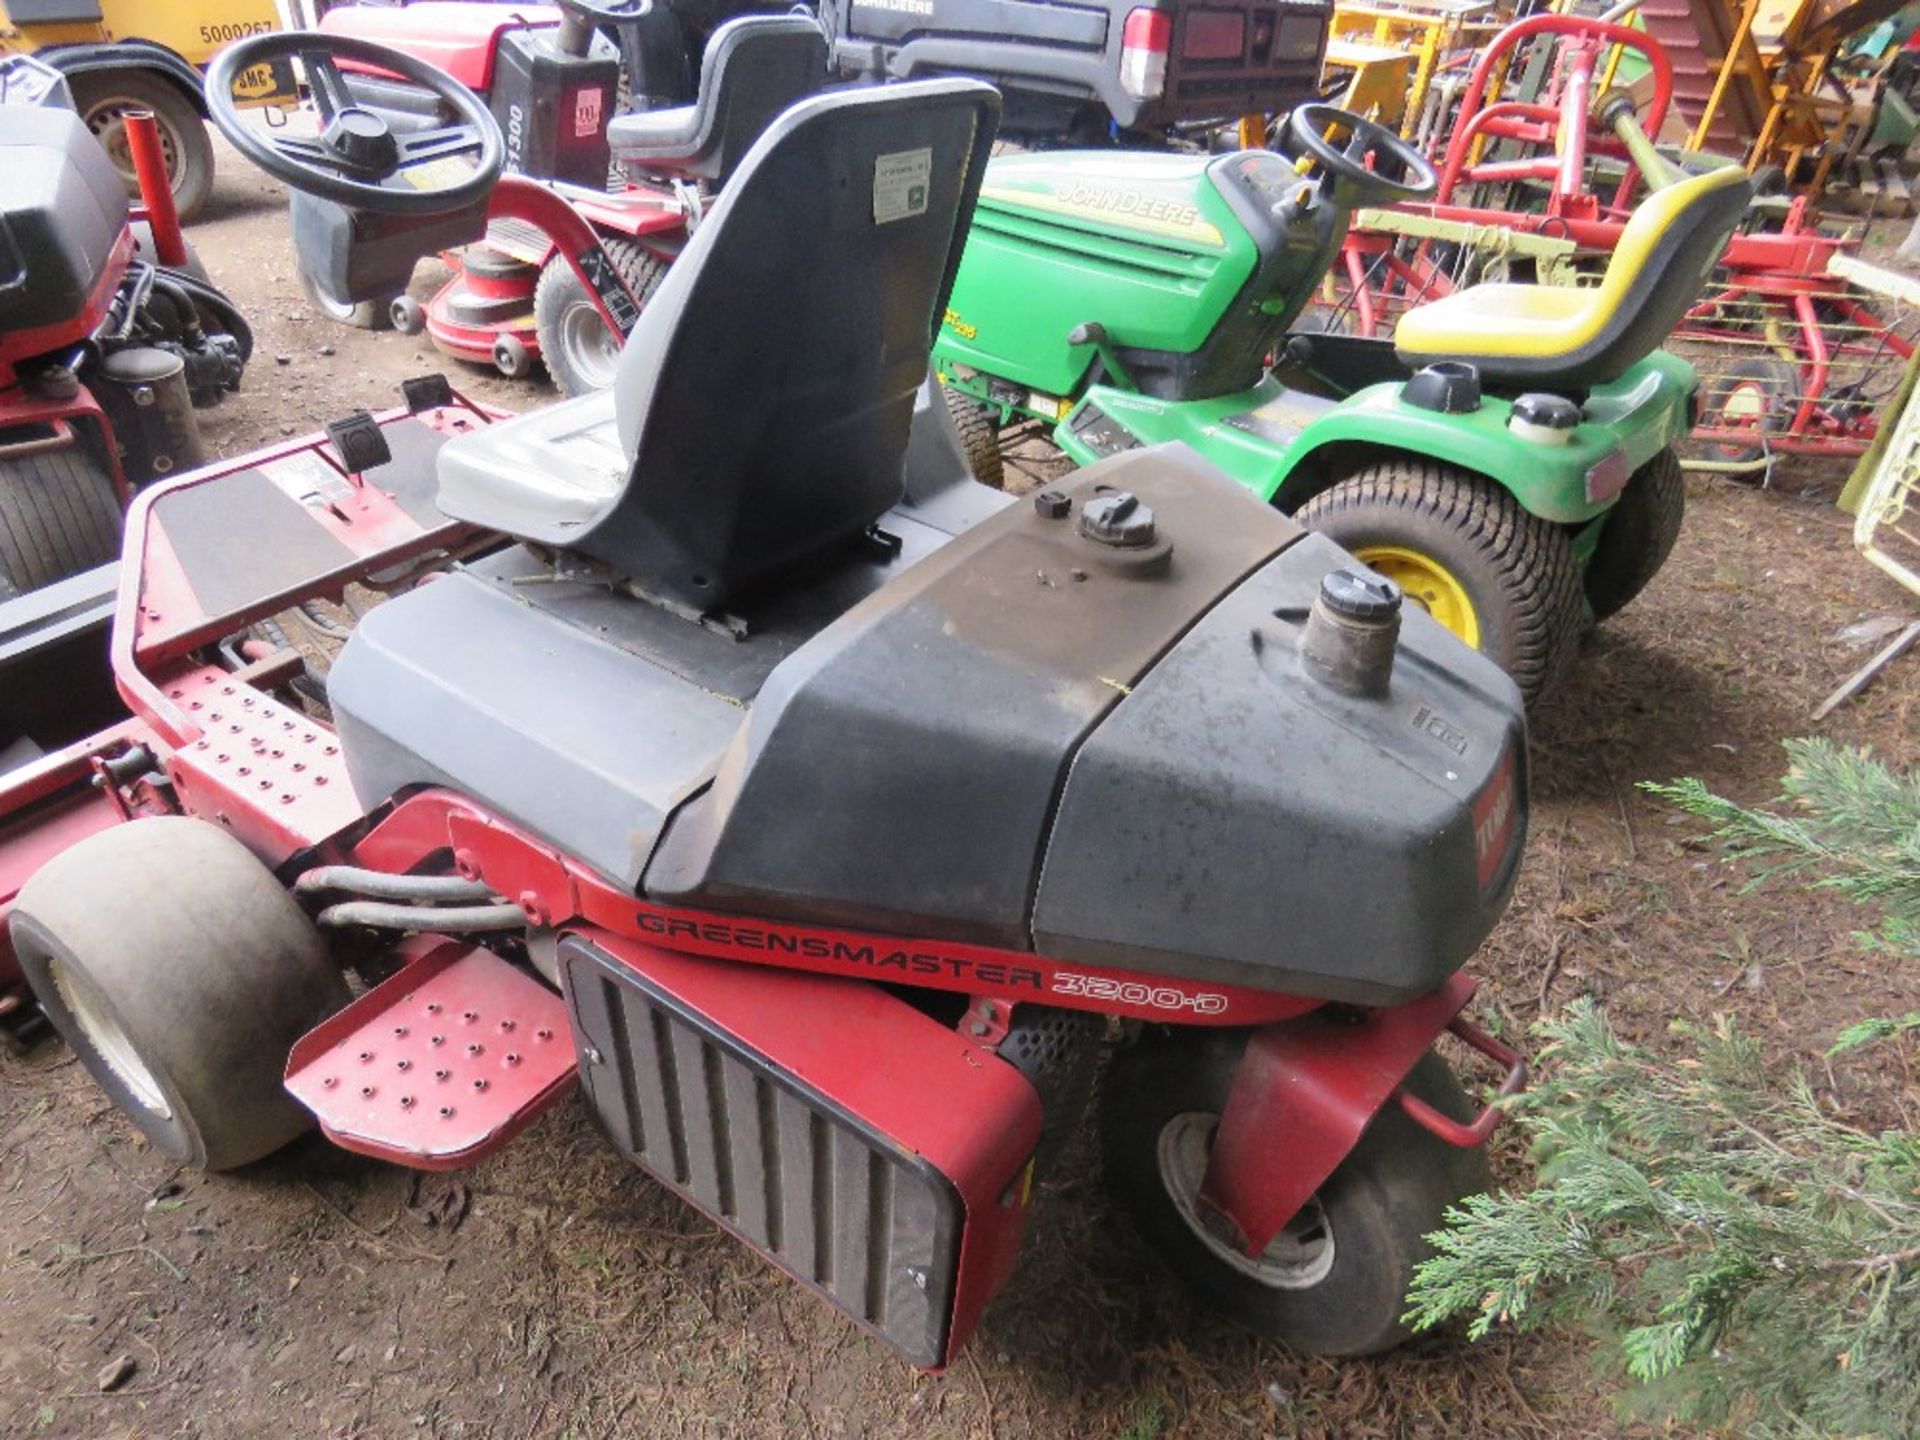 TORO 3200D TRIPLE GREENS MOWER C/W GRASS BOXES WHEN TESTED WAS SEEN TO RUN AND DRIVE - Image 3 of 3